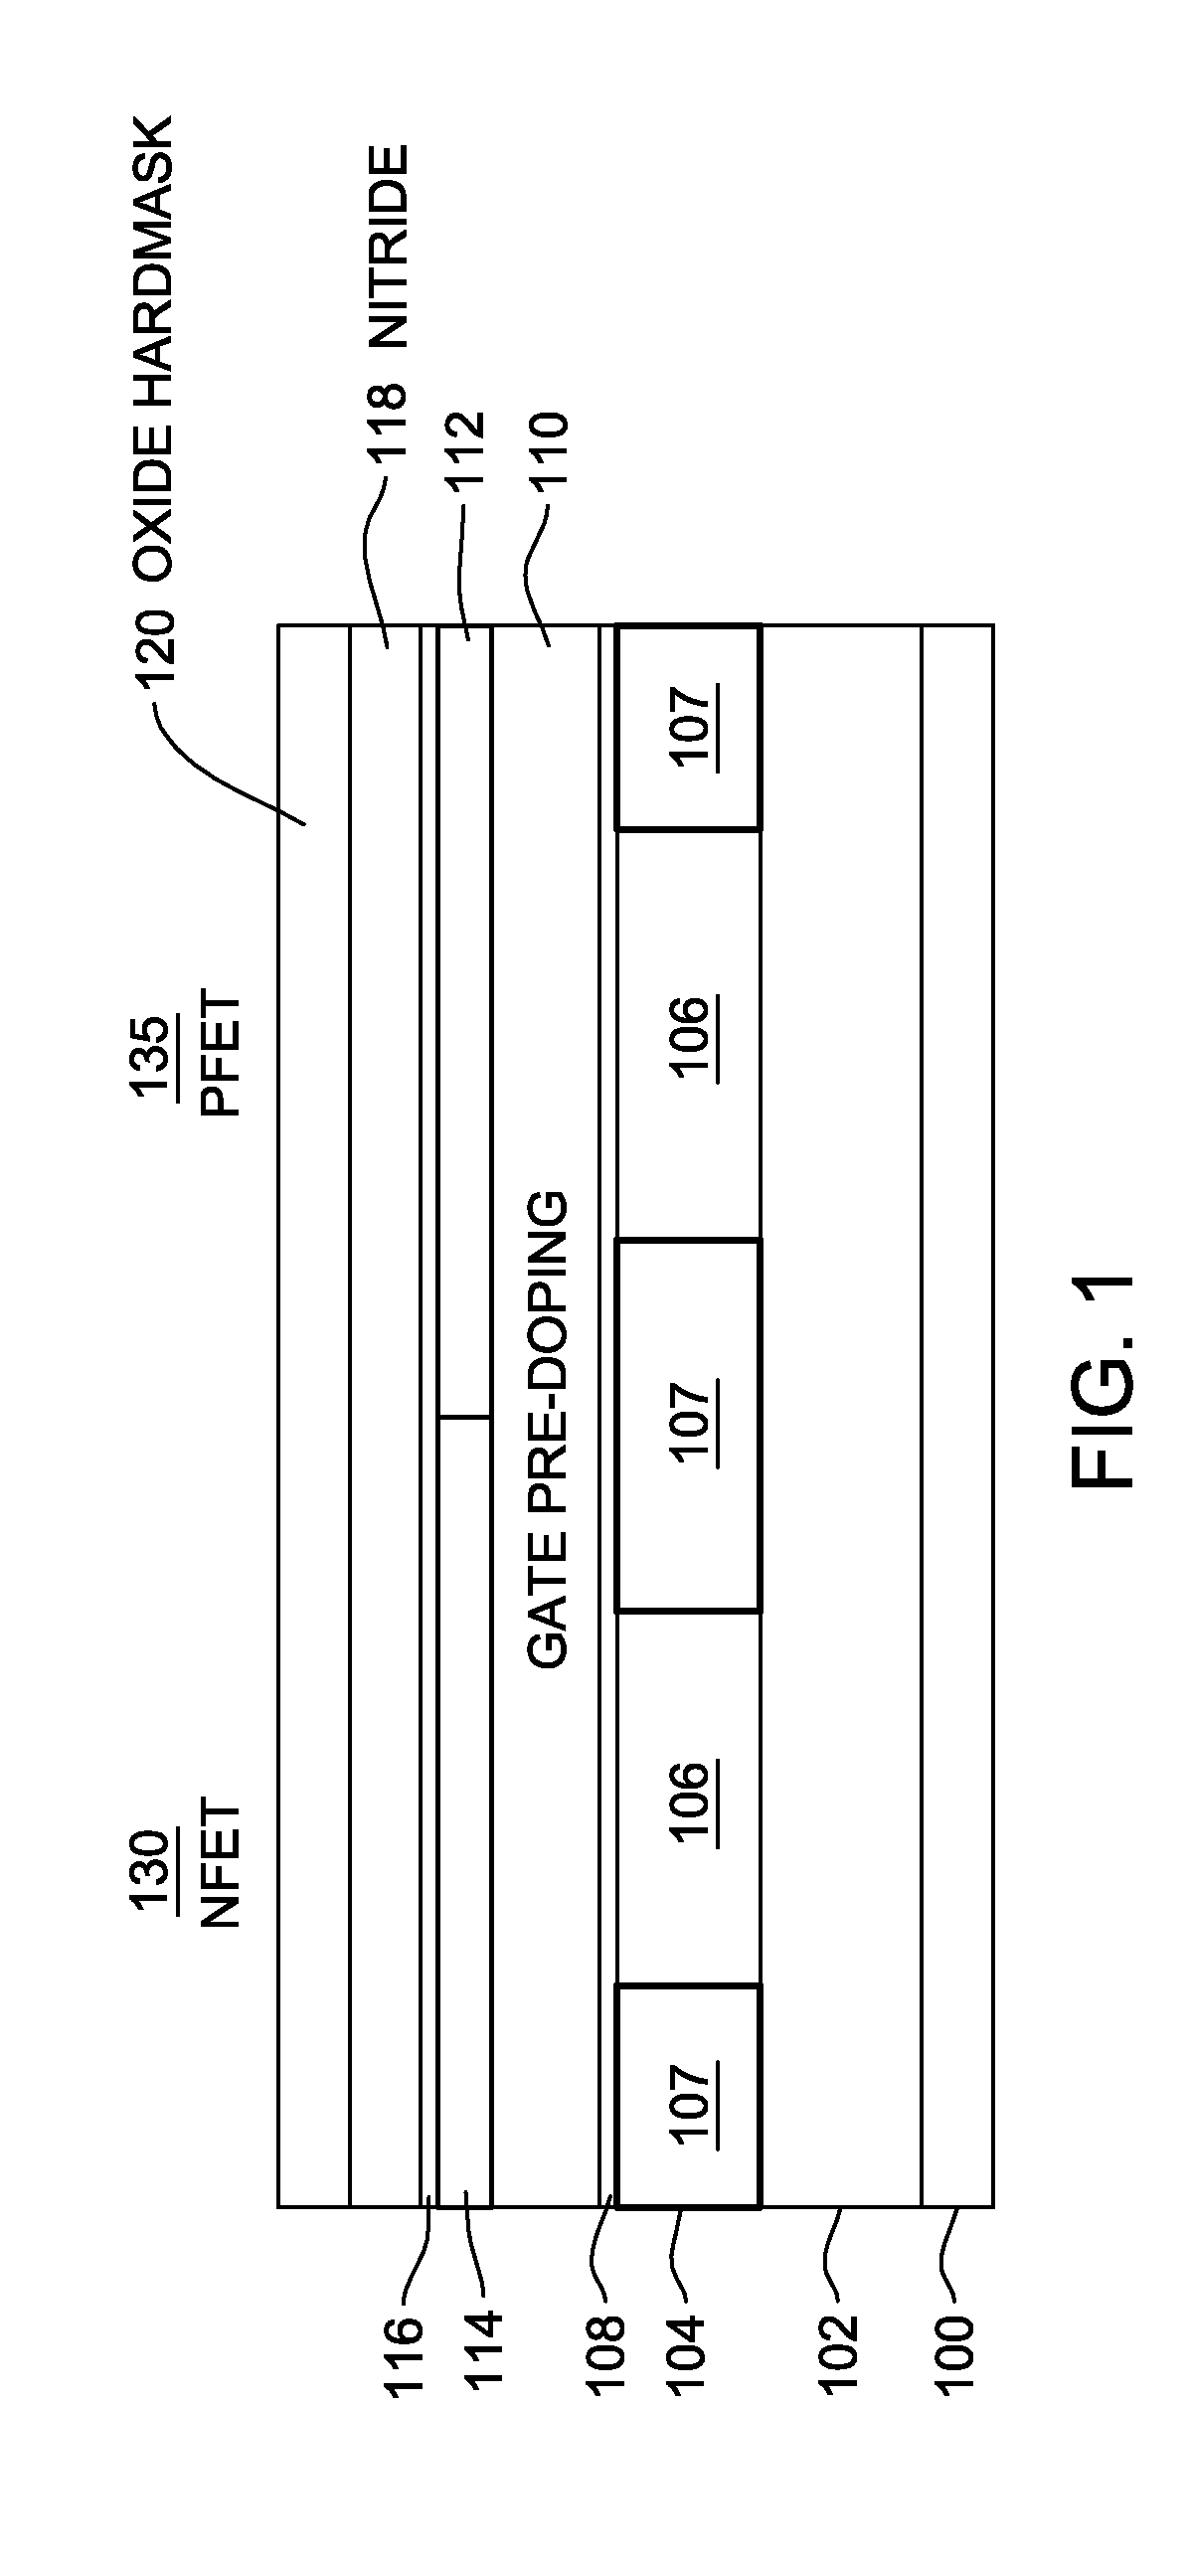 In situ doped embedded sige extension and source/drain for enhanced PFET performance